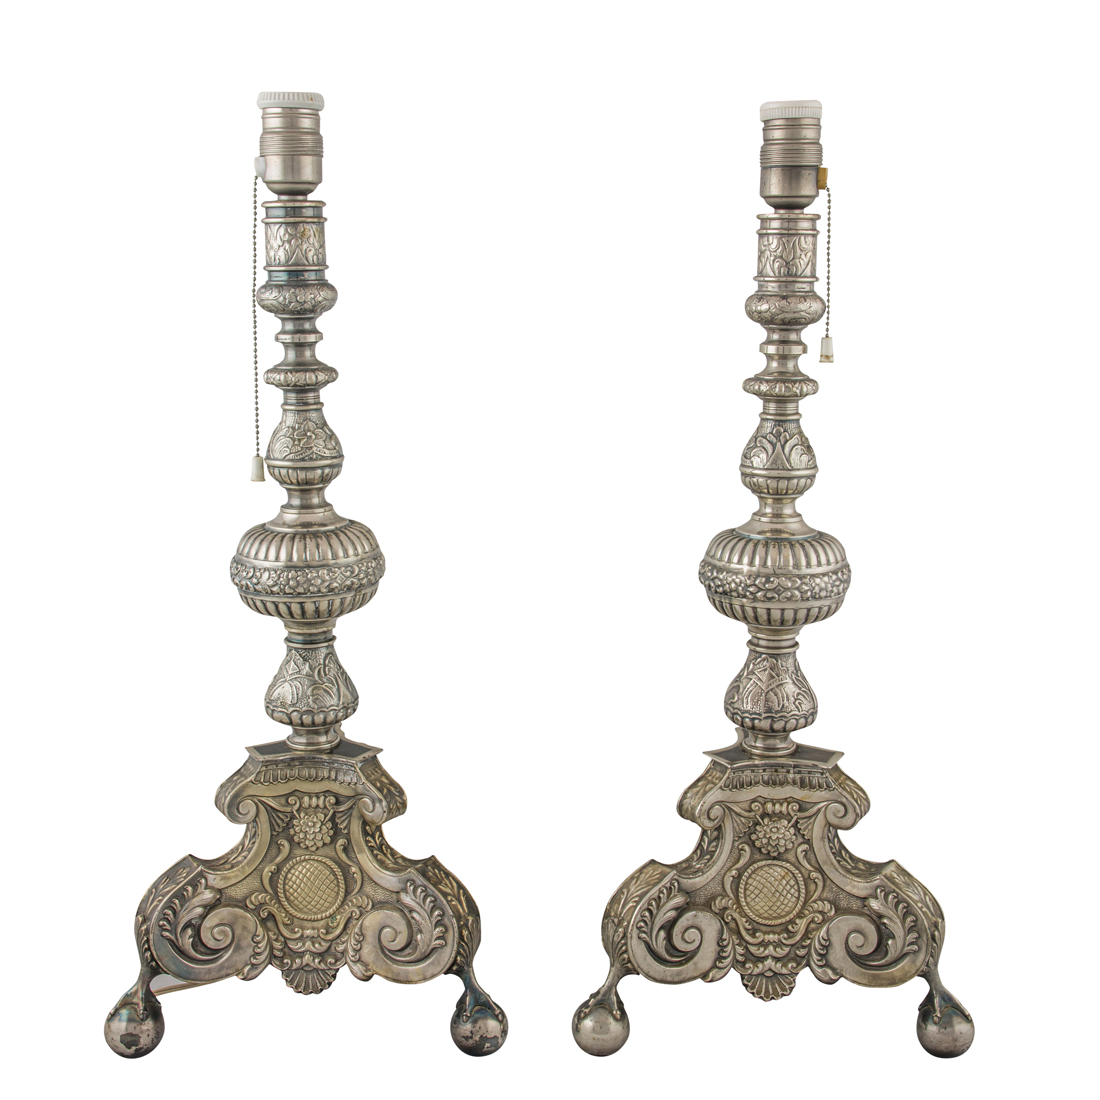 A PAIR OF SPANISH SILVER PRICKET